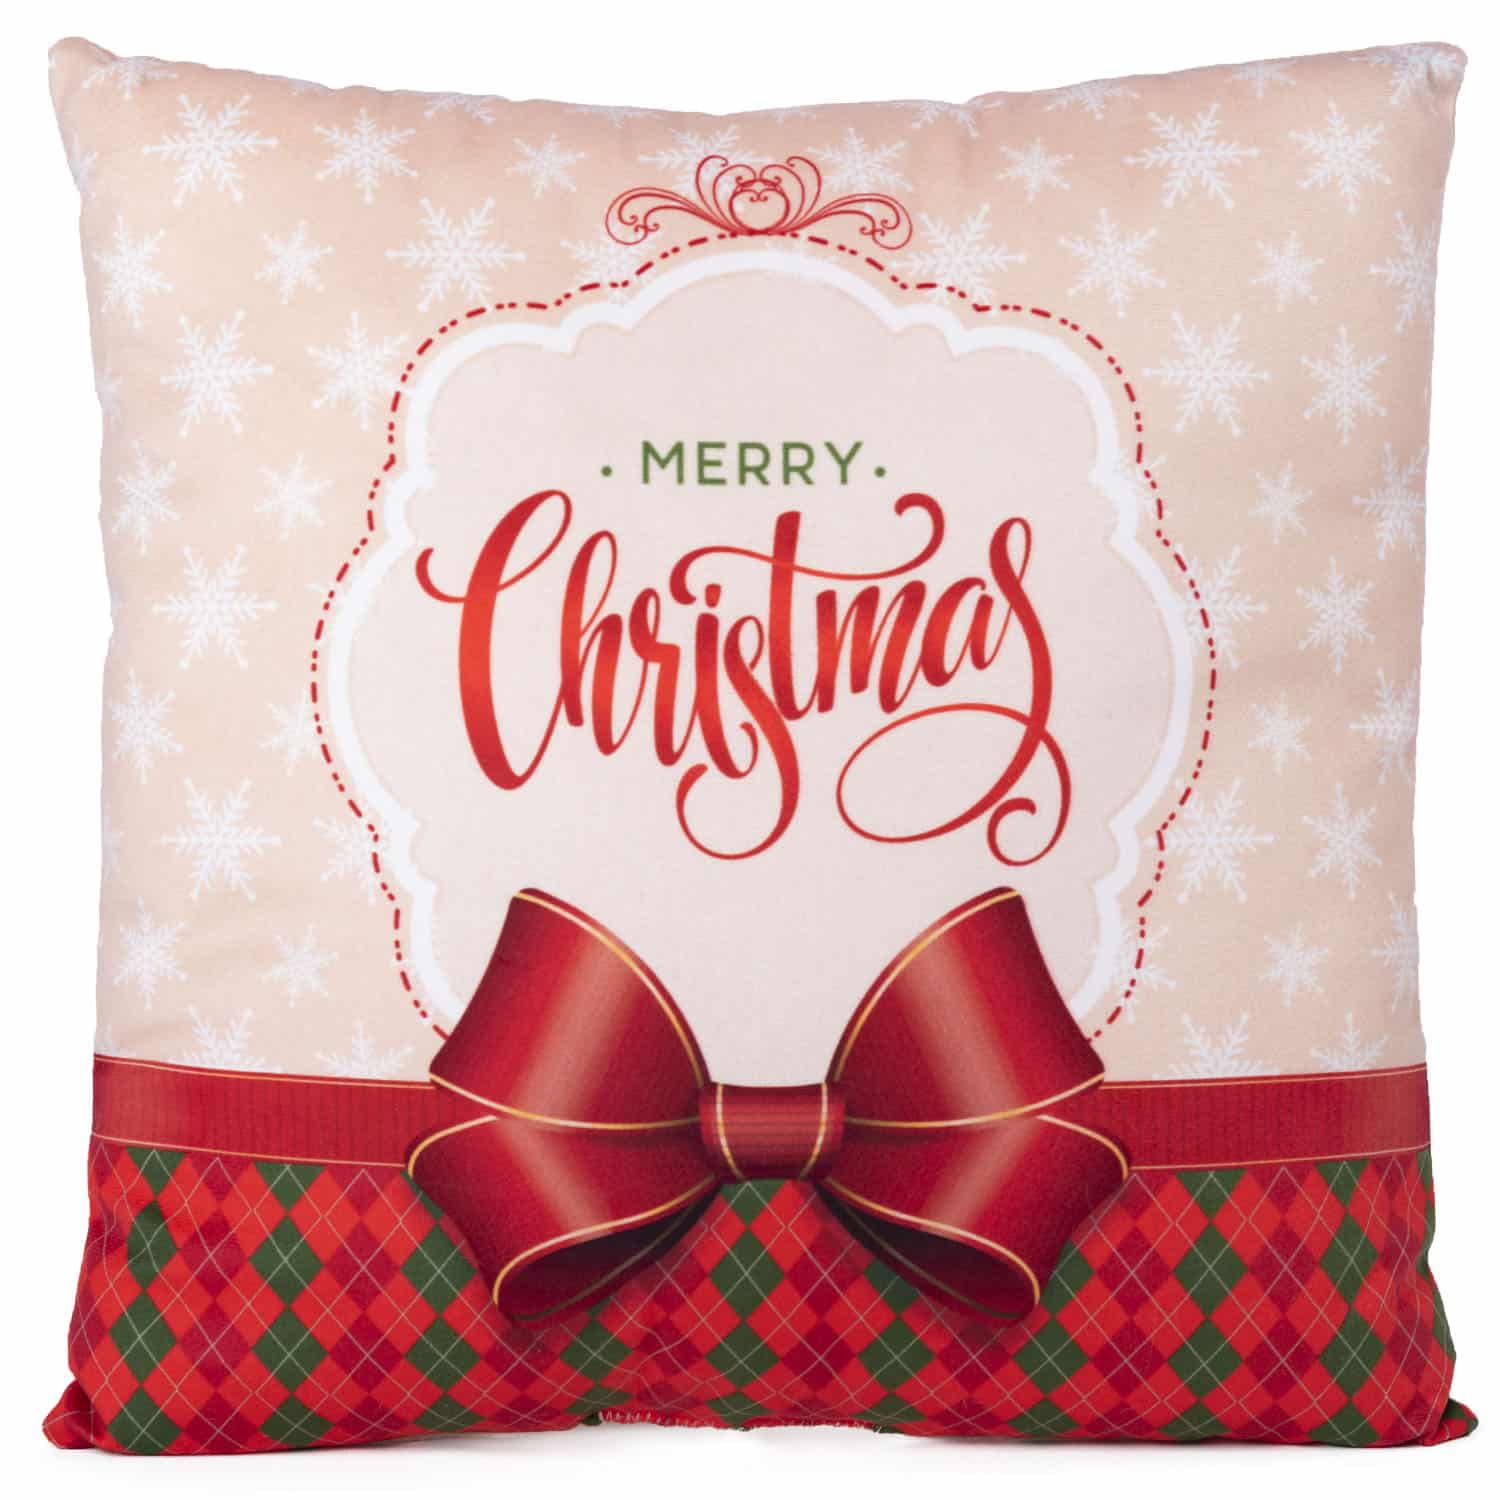 Christmas pillow with ribbon